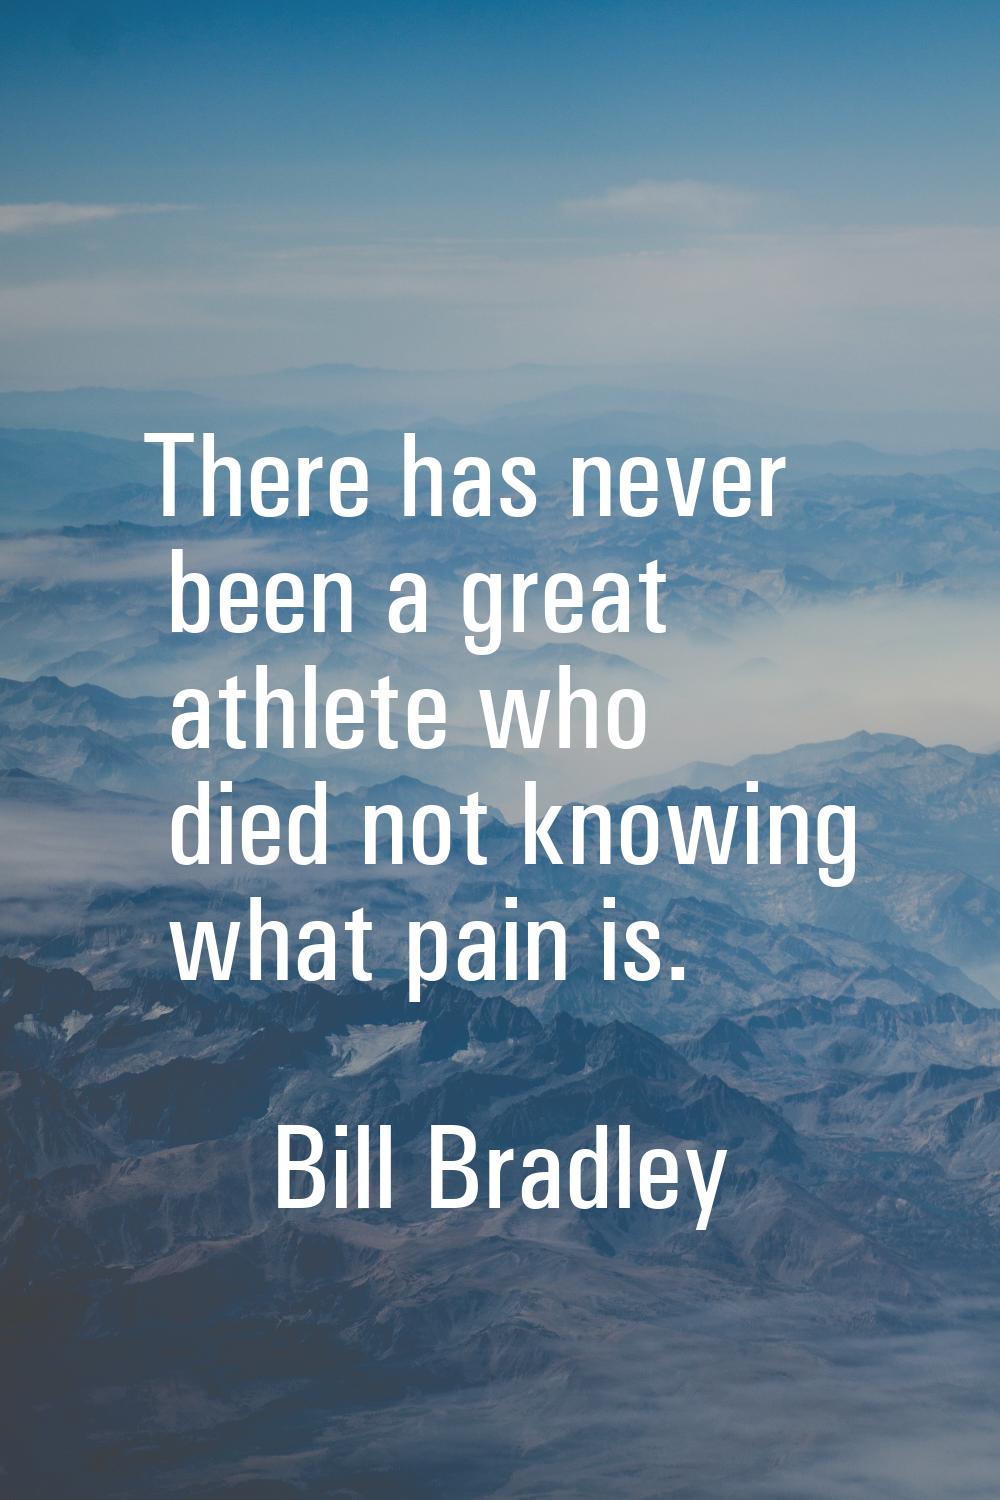 There has never been a great athlete who died not knowing what pain is.